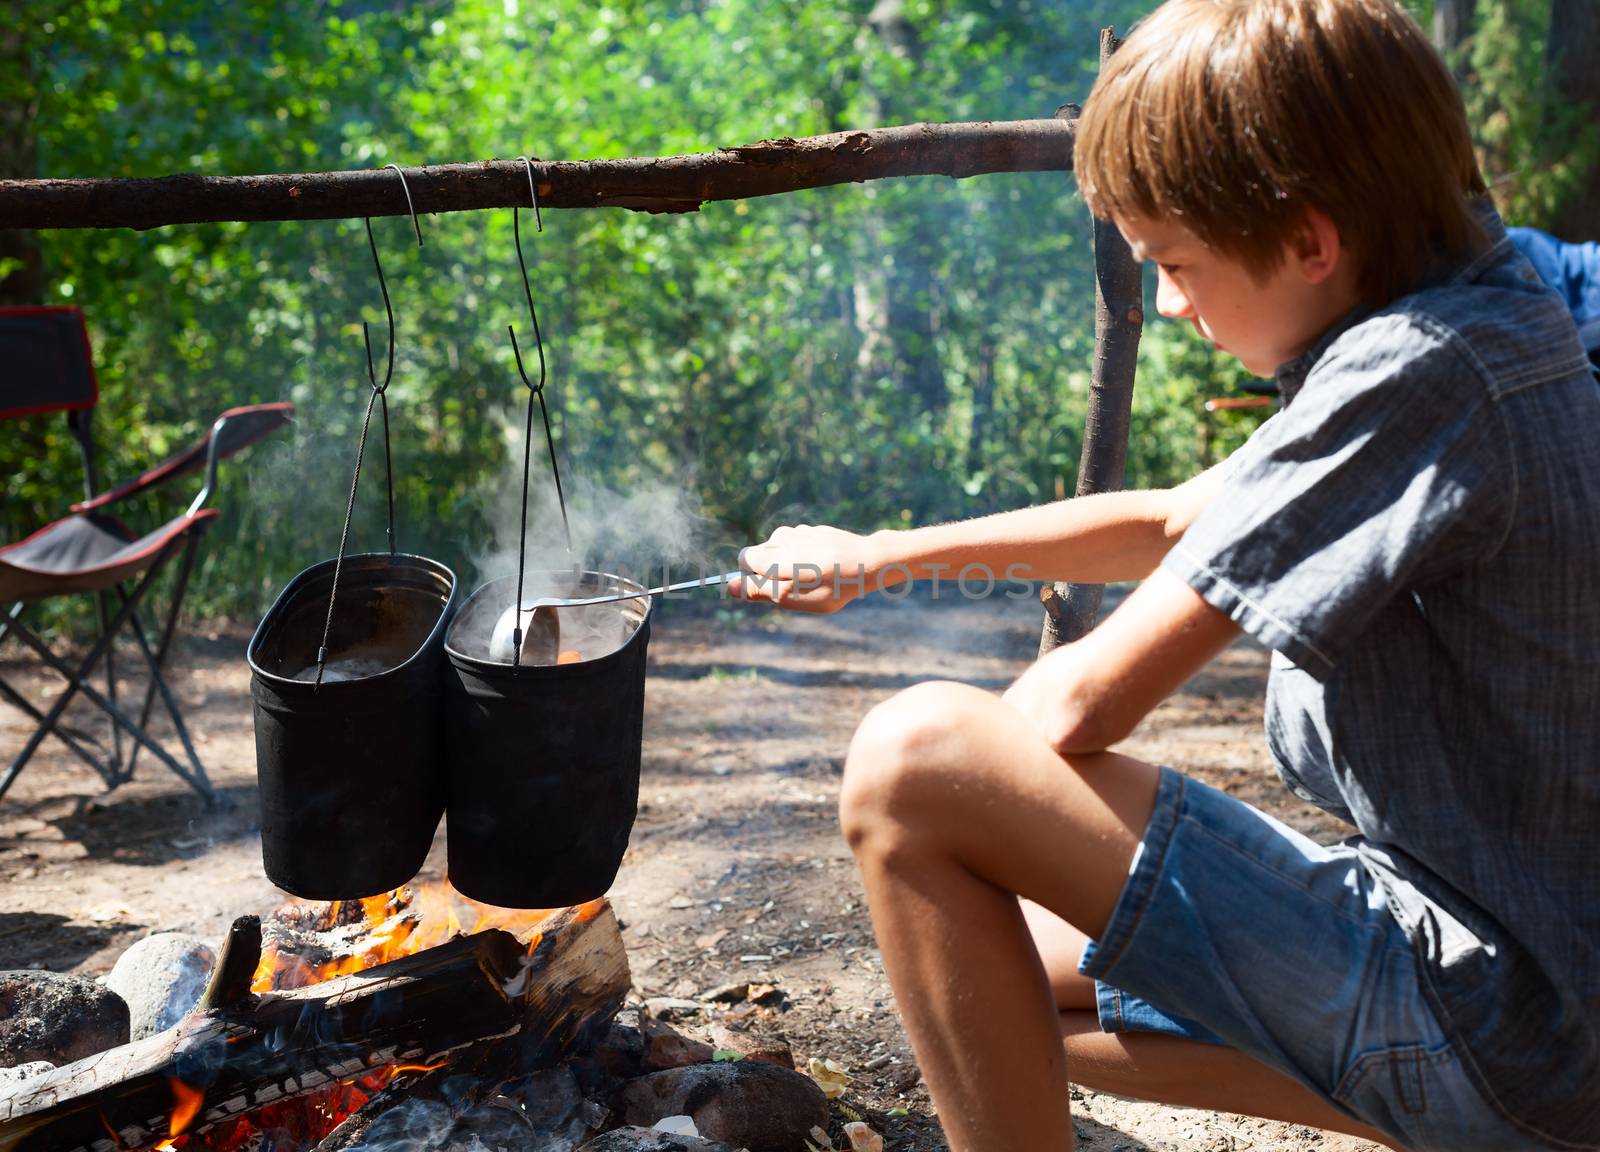 Child cooking on campfire by naumoid